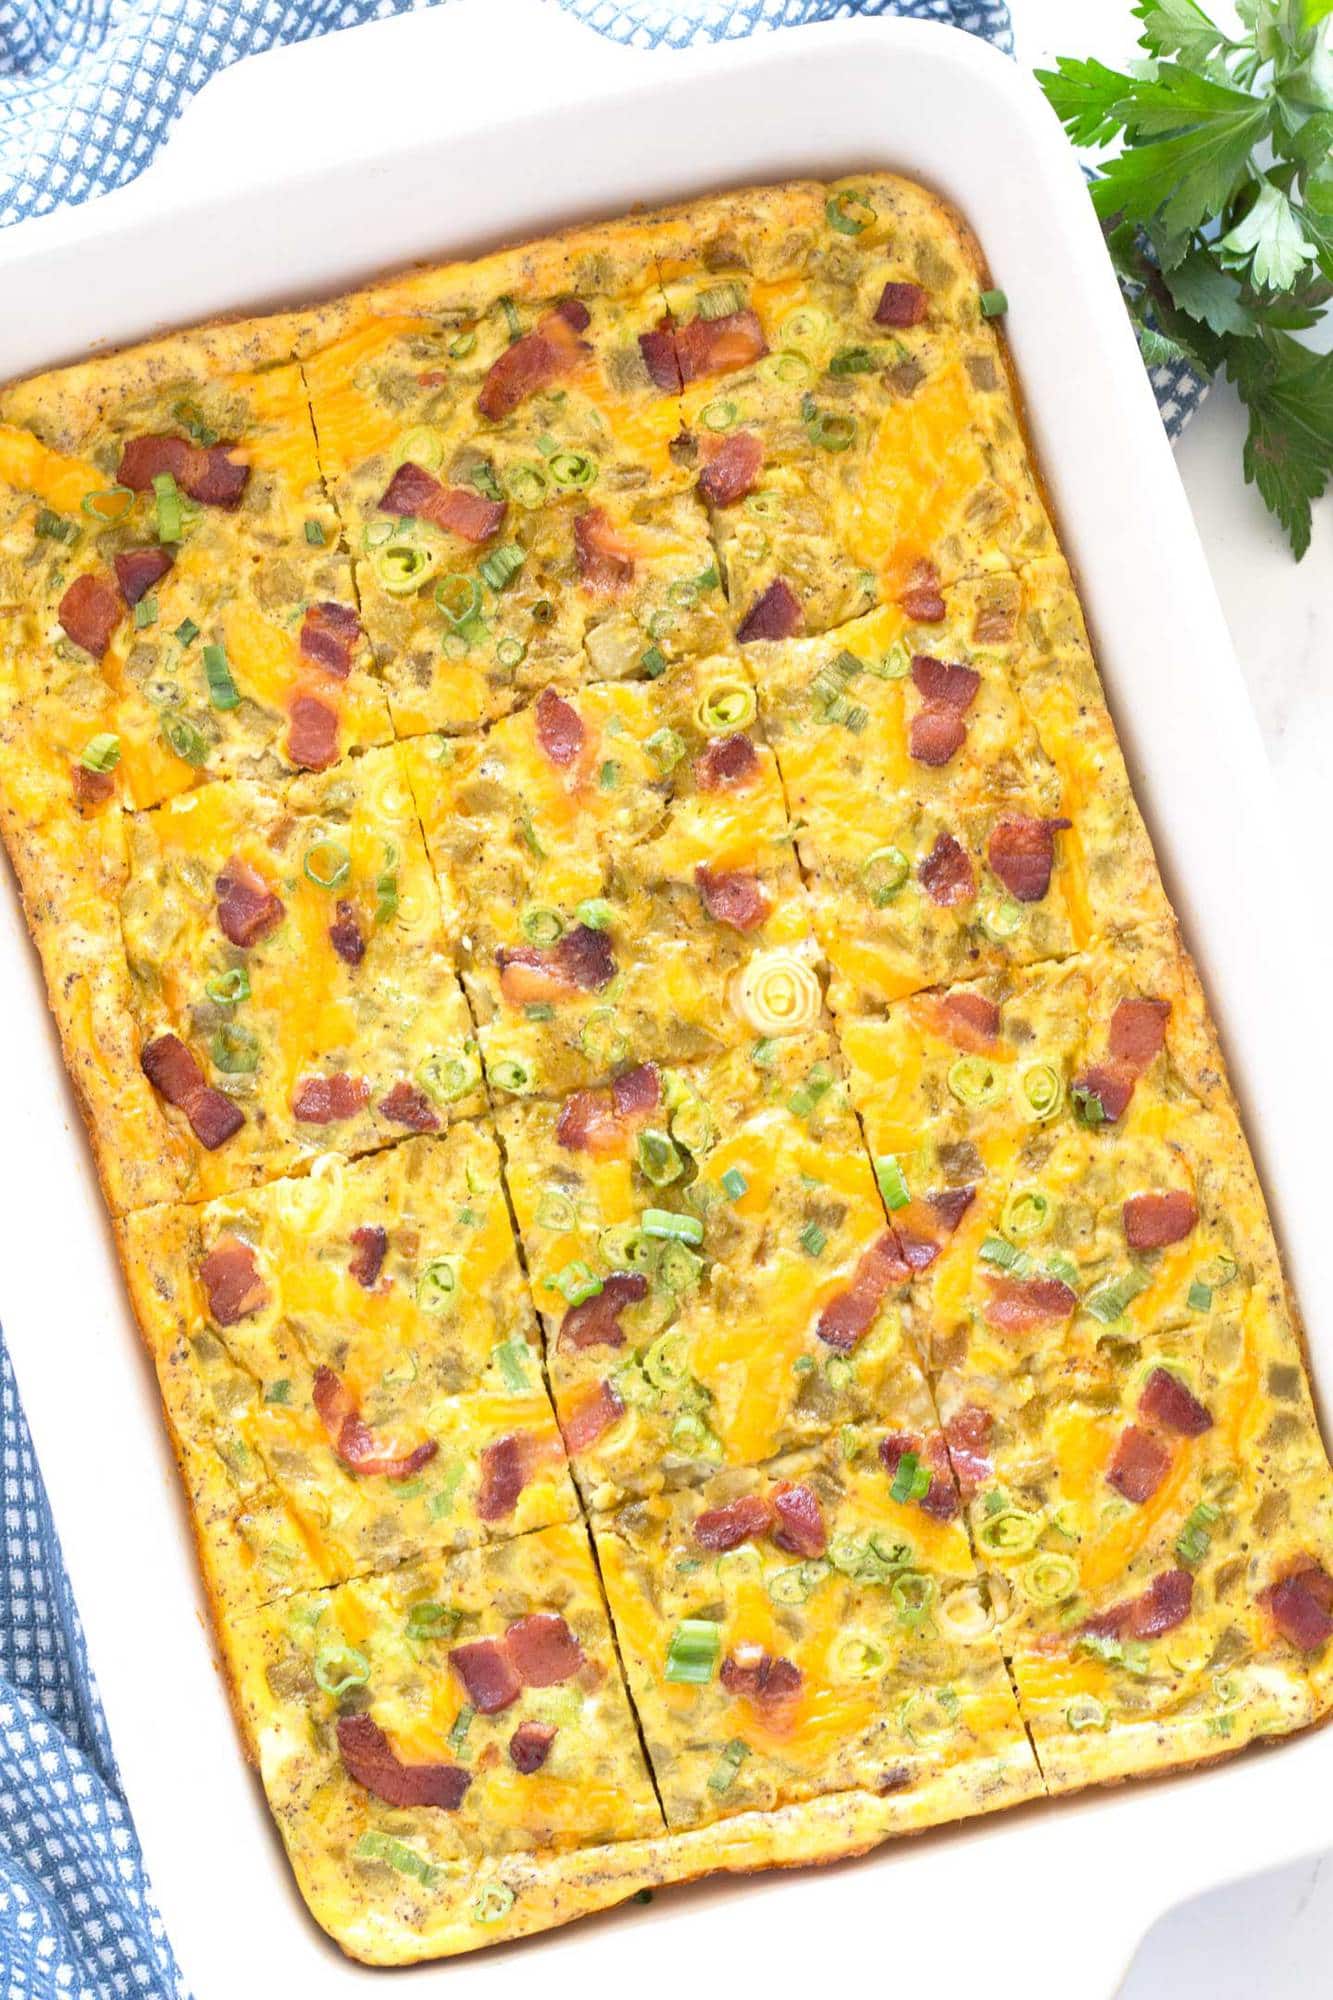 Pieces of breakfast casserole with bacon and green chilis in the baking pan.